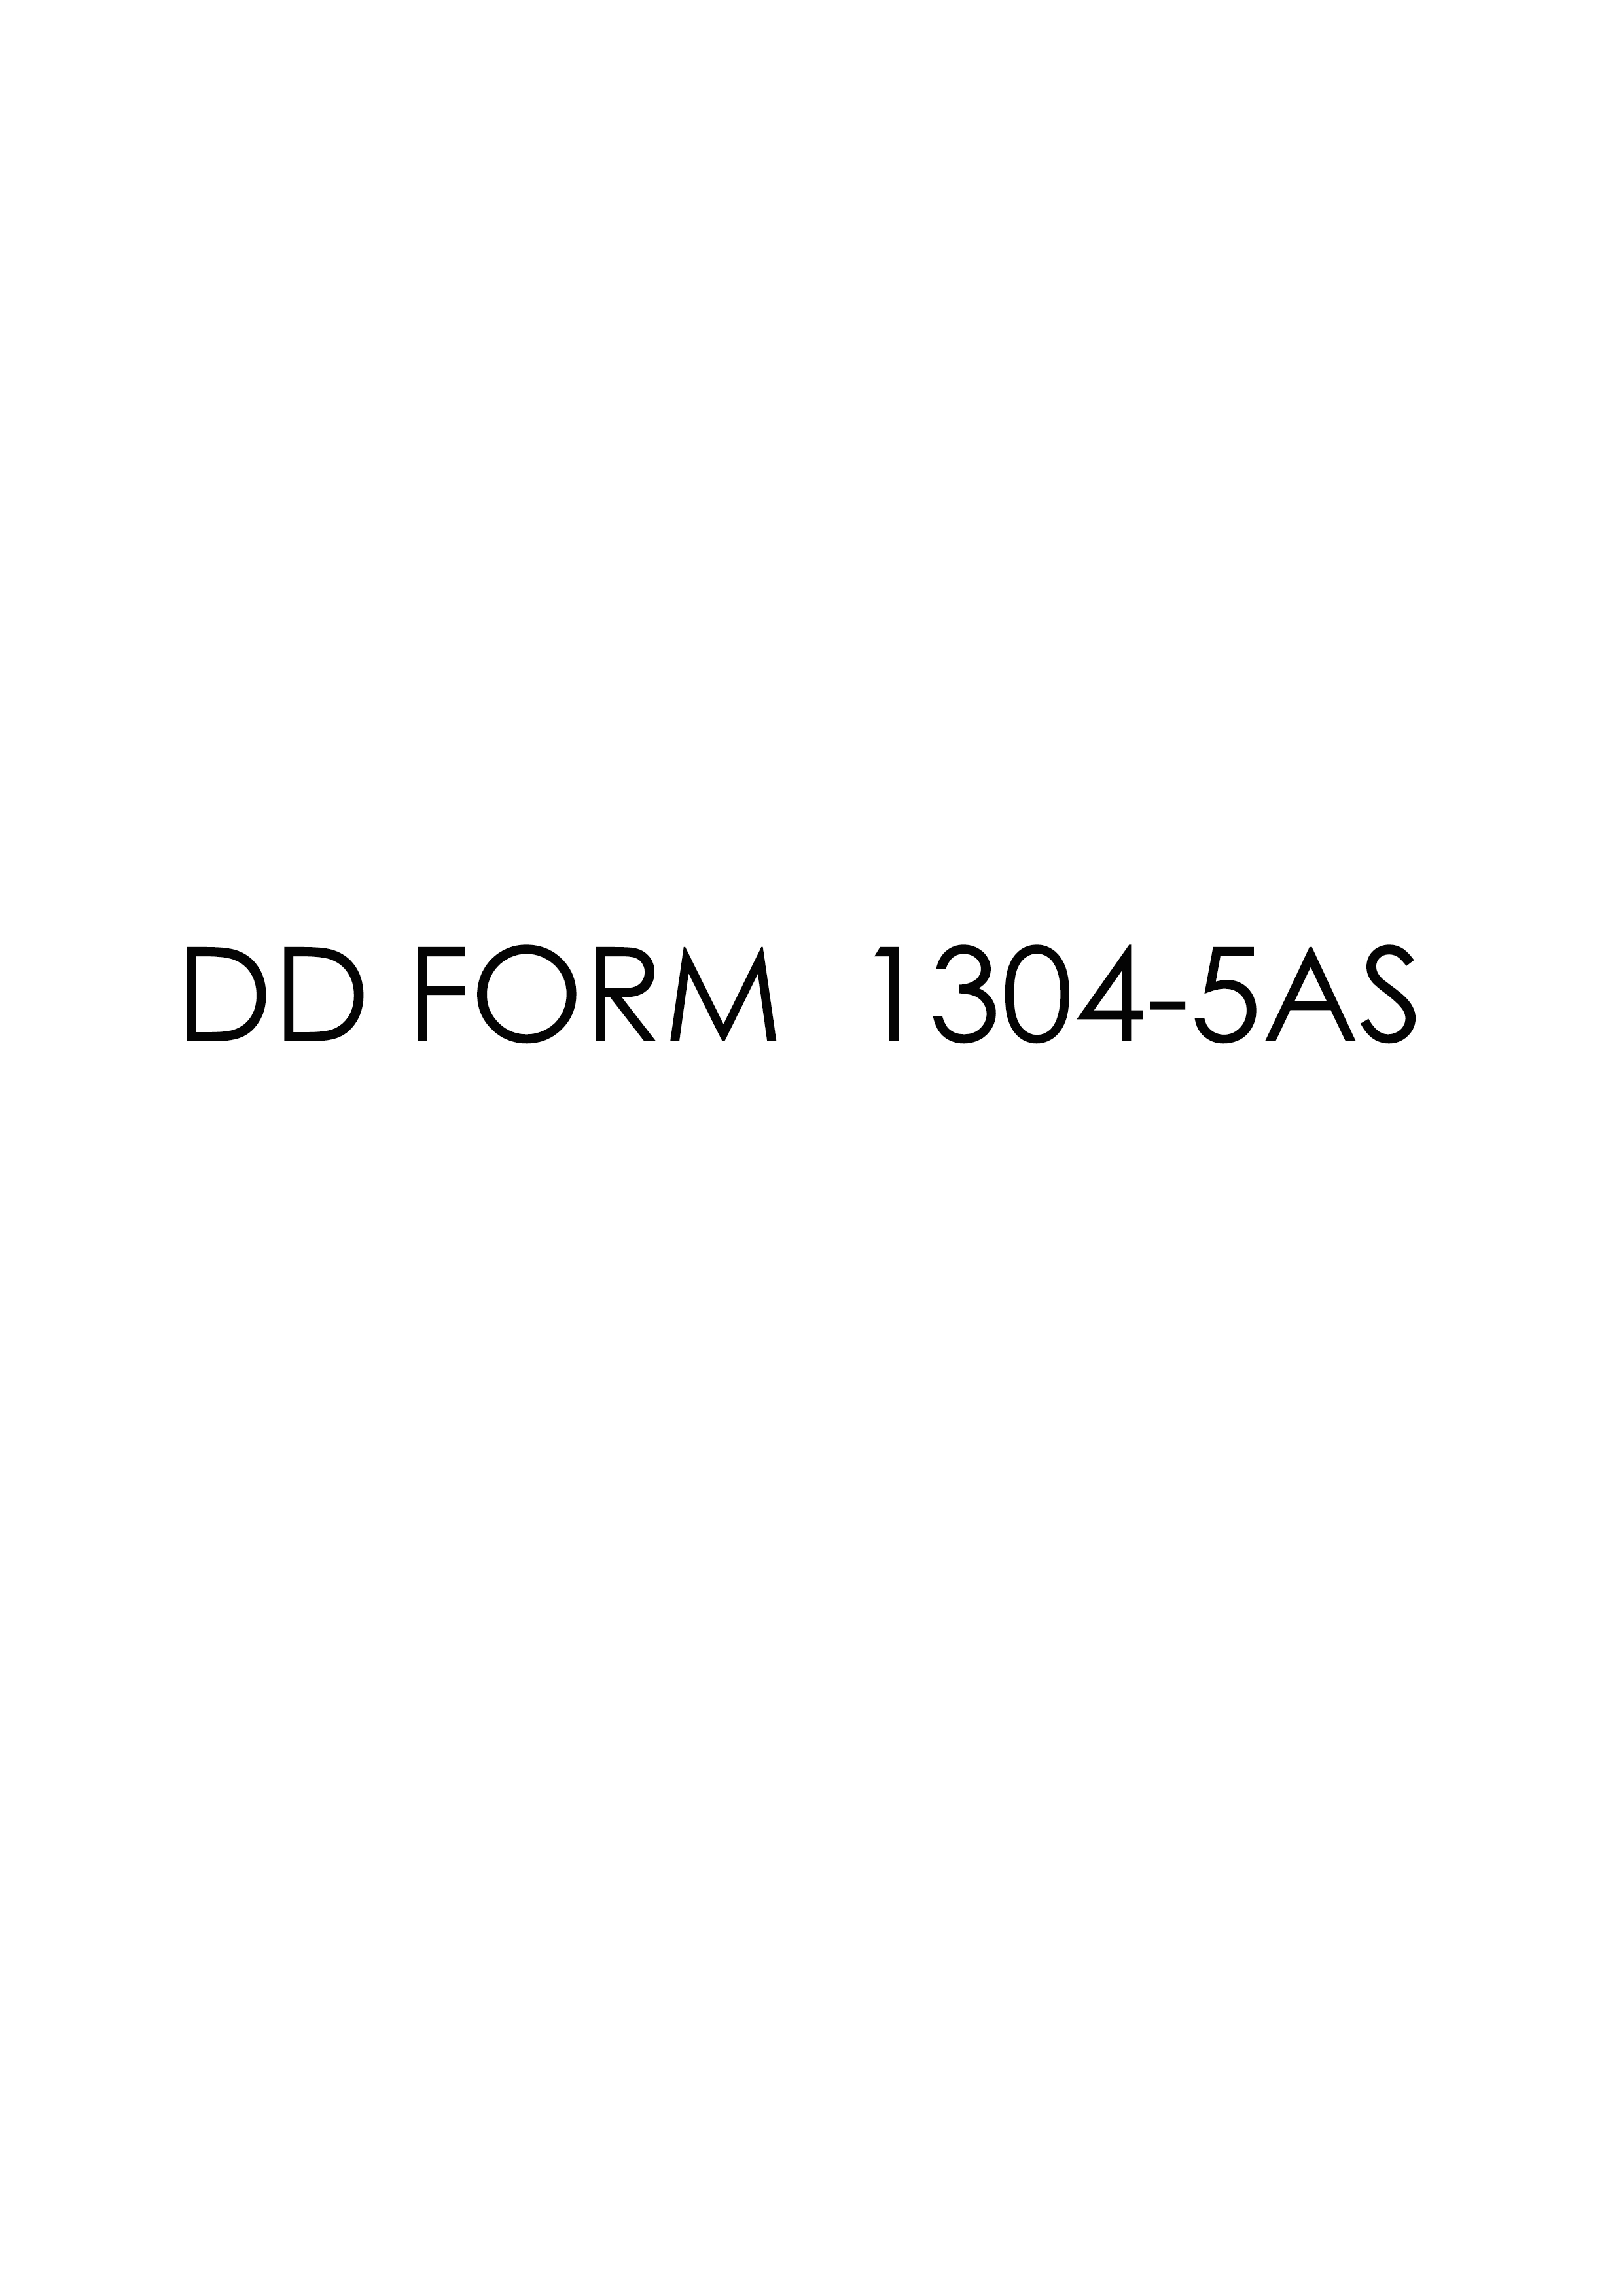 Download dd 1304-5AS Form